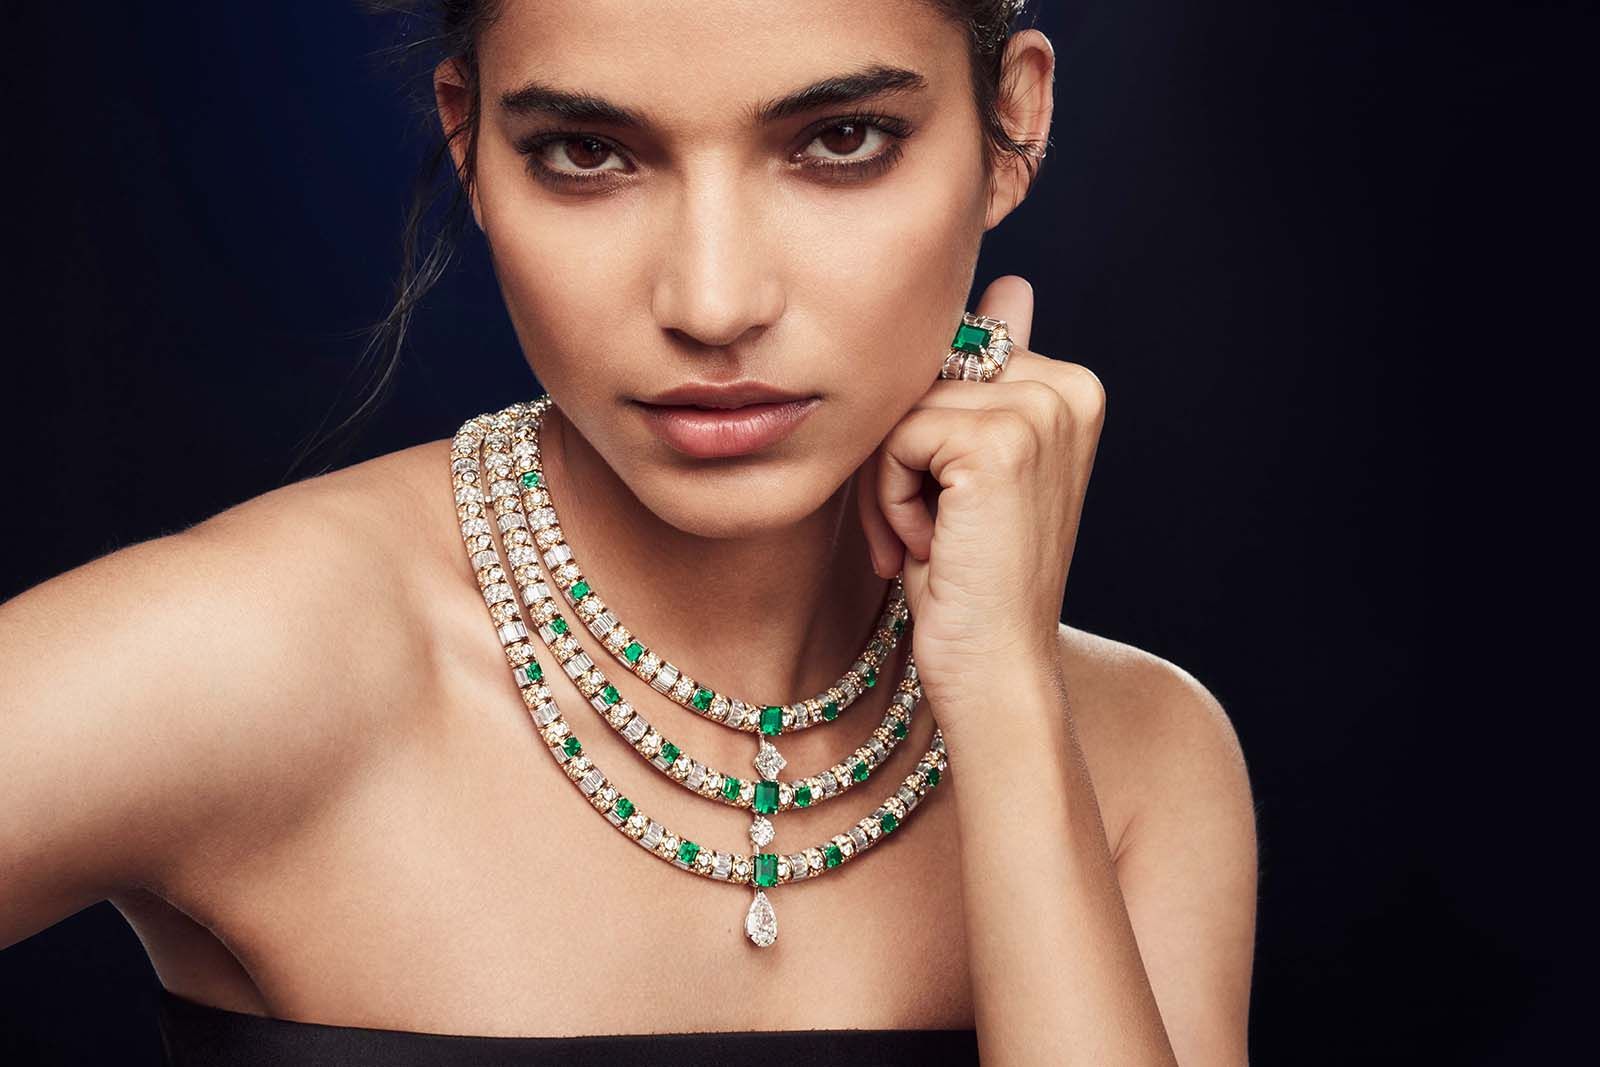 L’Aventure necklace from the Bravery by Louis Vuitton Collection with a pear-shaped diamond of 5.21 carats, an LV Monogram flower-cut diamond of 3.02 carats, and a brilliant-cut diamond of 1.62 carats, alongside emeralds, custom-cut diamonds and brilliant-cut diamonds 